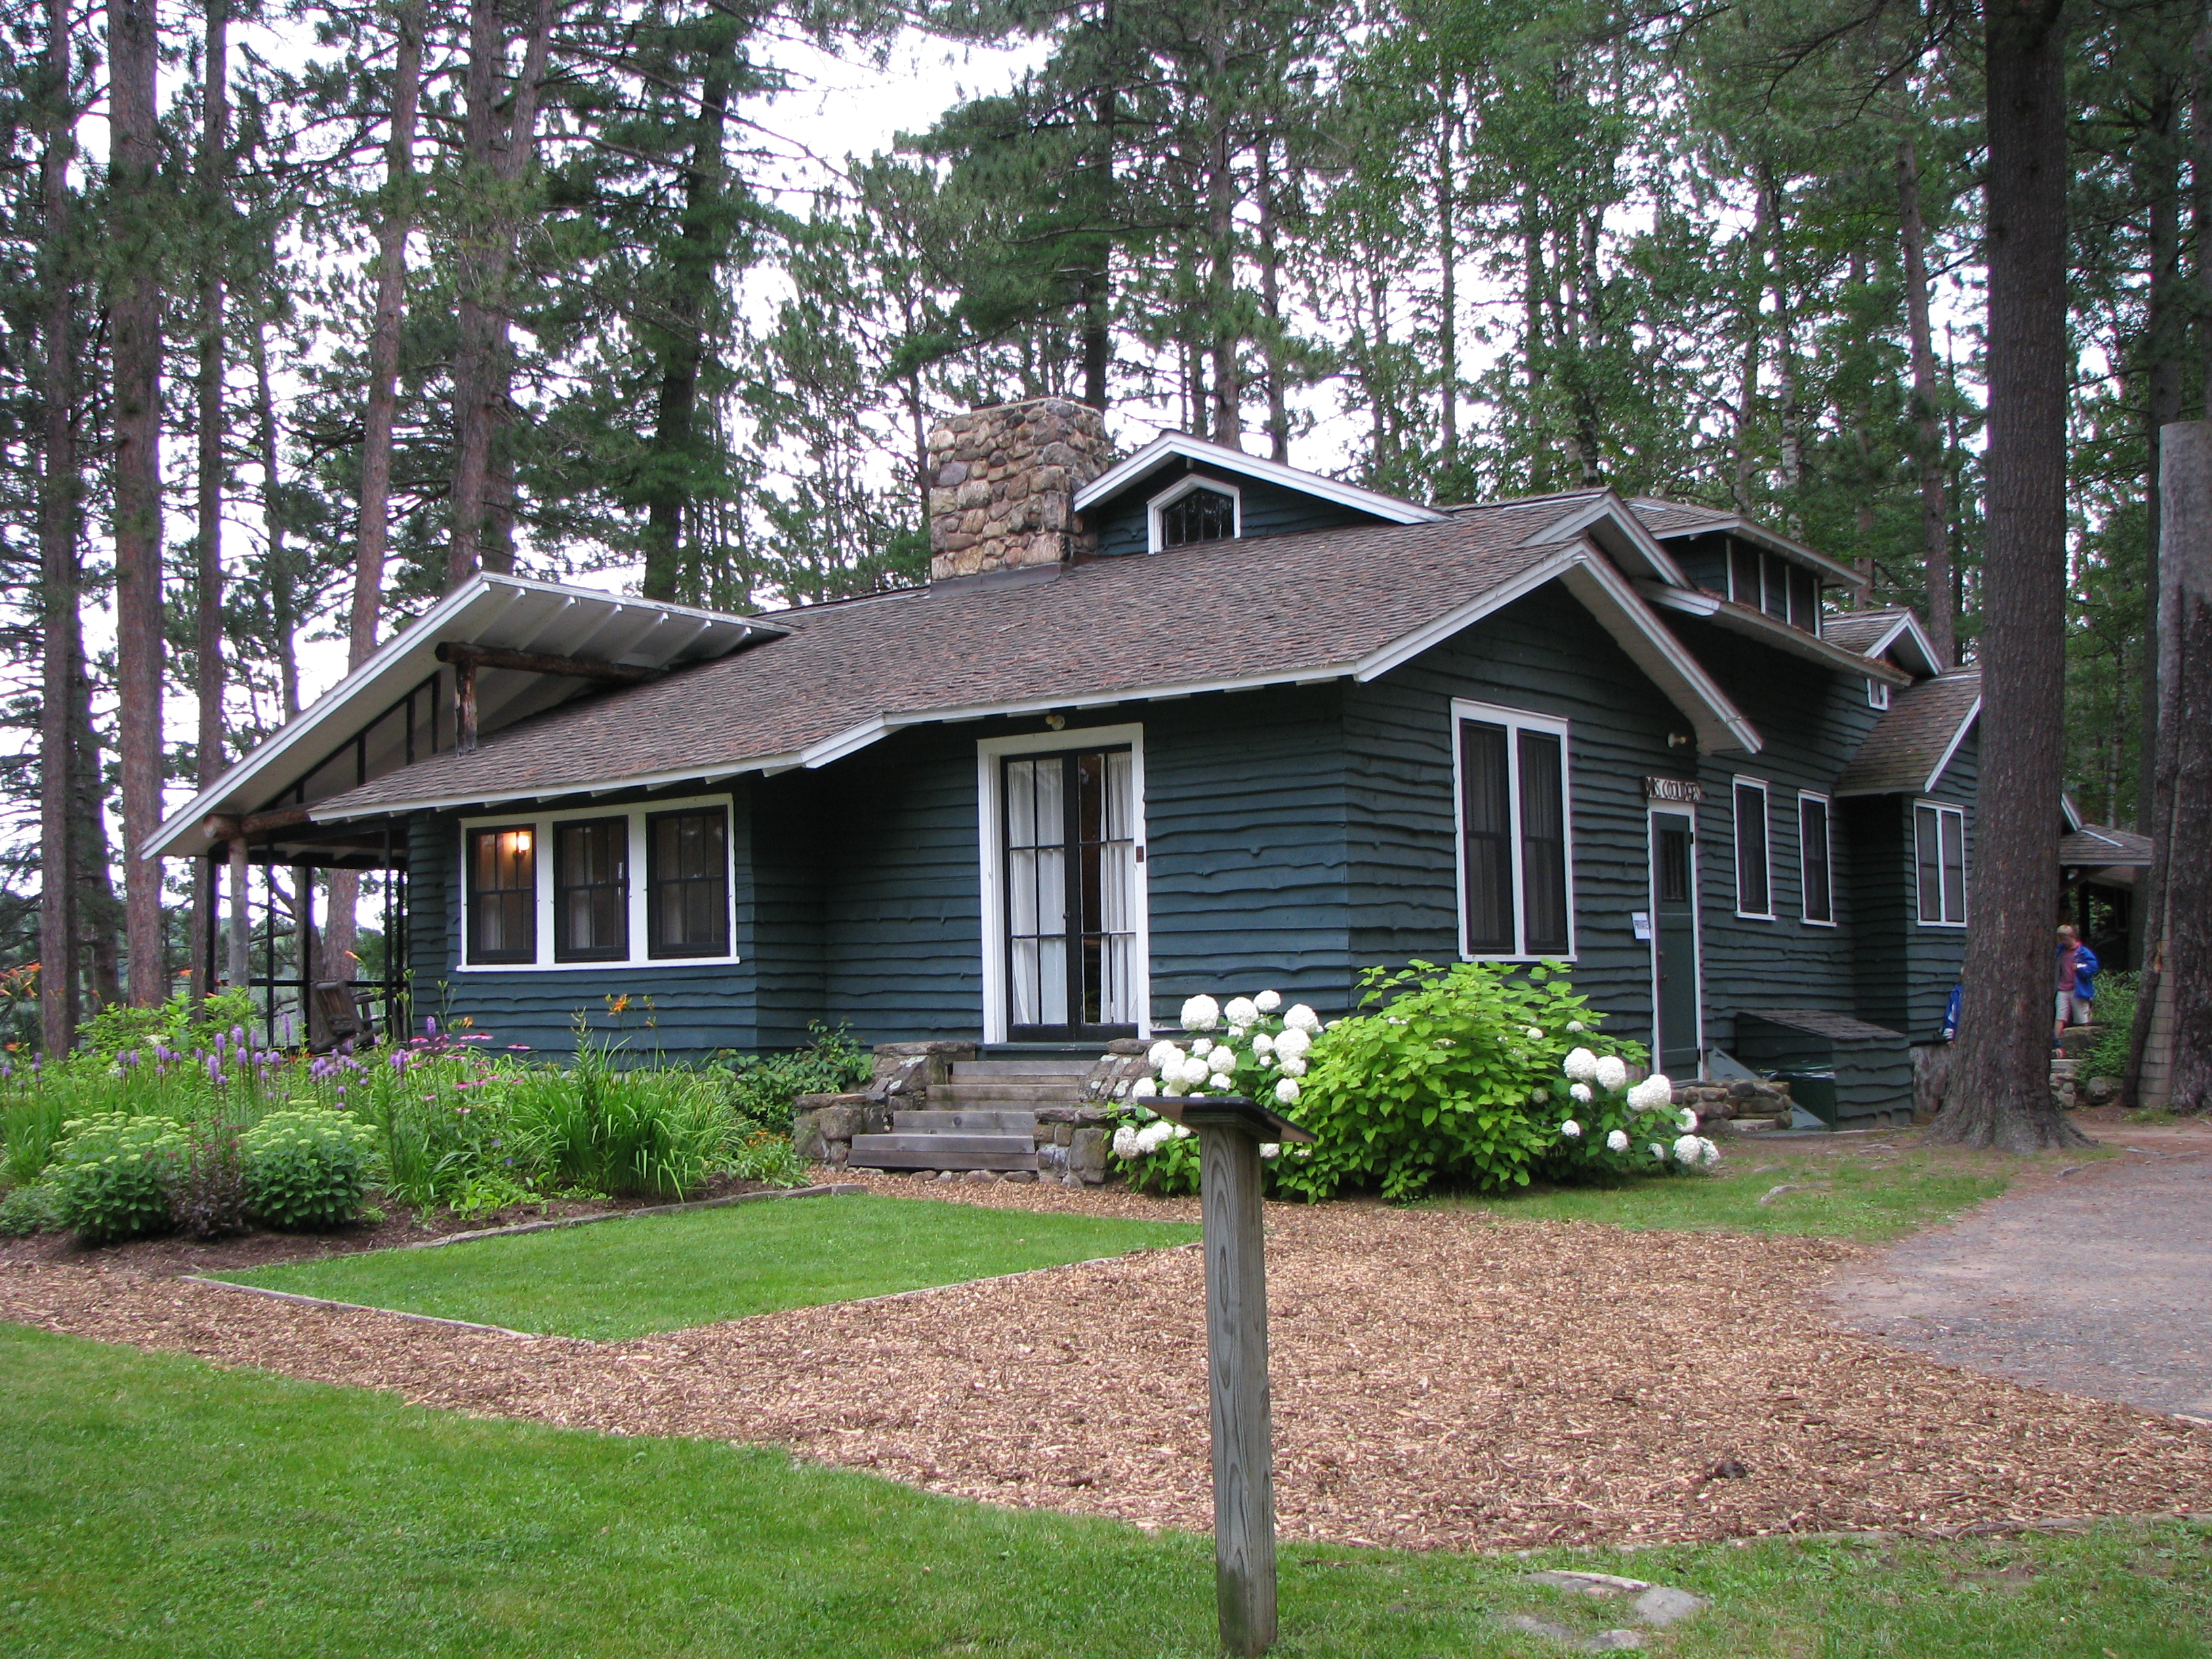 File:White Pine Camp - Owners Cottage.jpg - Wikimedia Commons